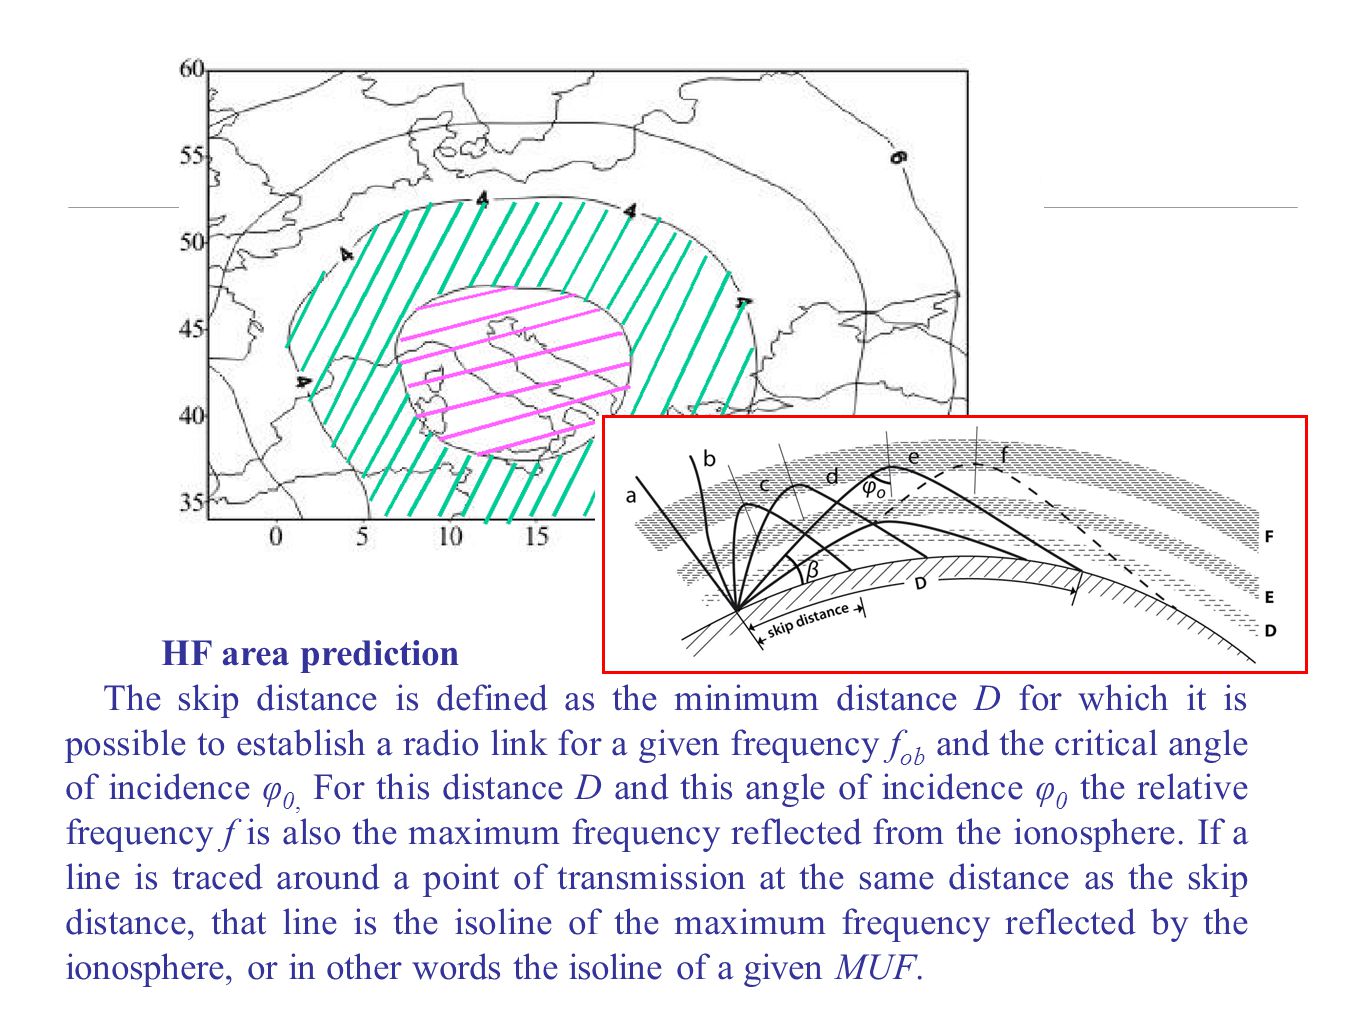 HF area prediction The skip distance is defined as the minimum distance D for which it is possible to establish a radio link for a given frequency f ob and the critical angle of incidence φ 0, For this distance D and this angle of incidence φ 0 the relative frequency f is also the maximum frequency reflected from the ionosphere.